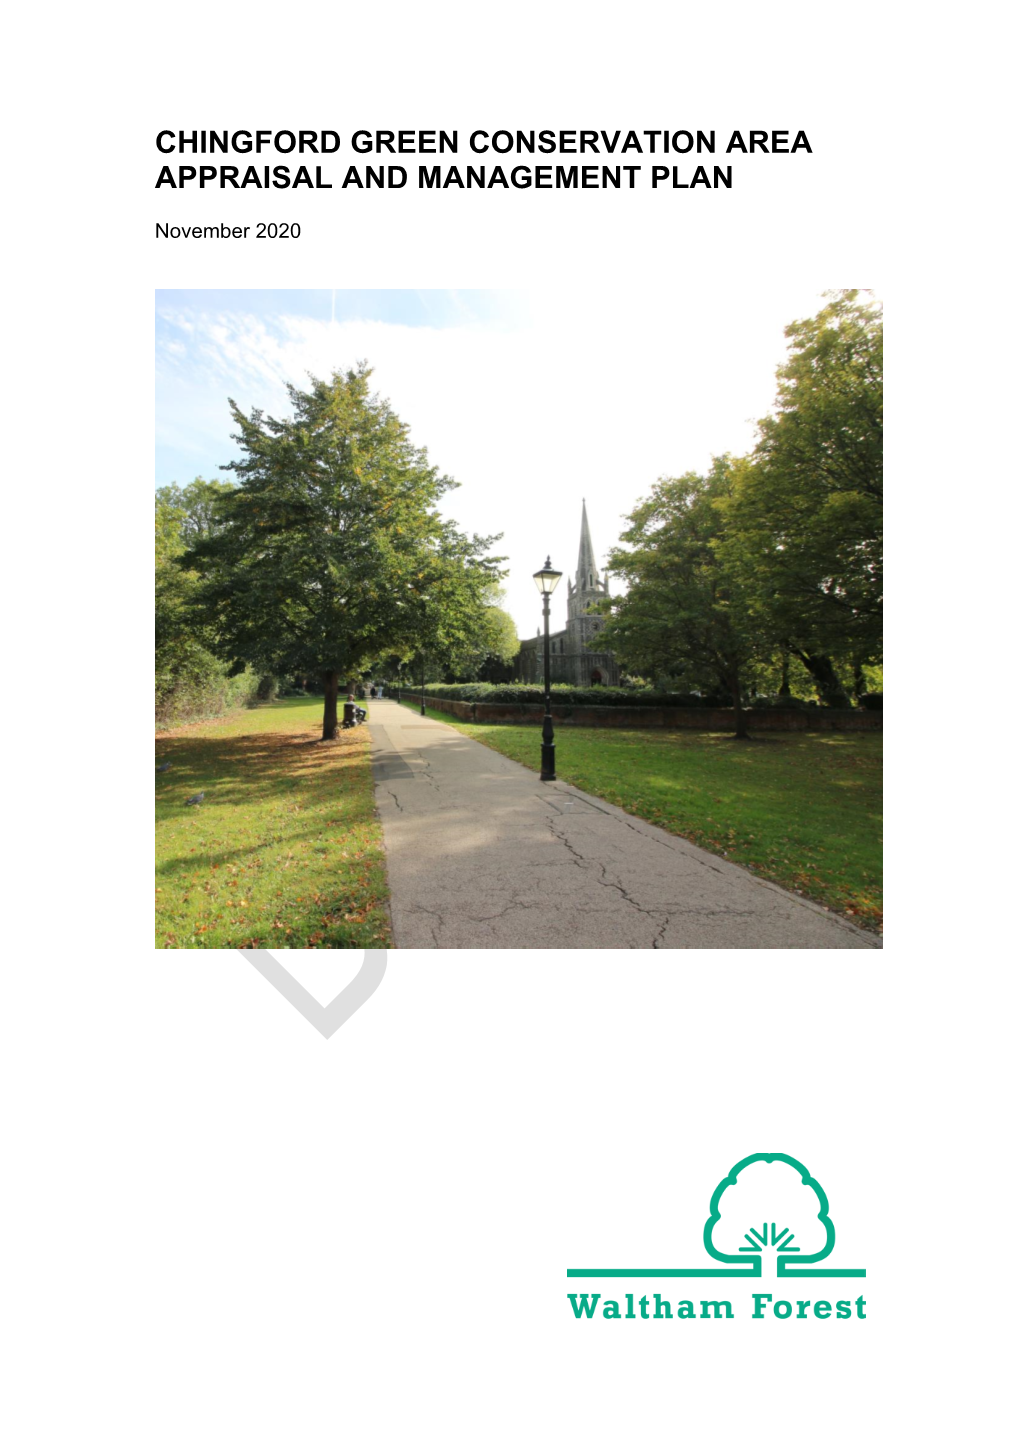 Chingford Green Conservation Area Appraisal and Management Plan